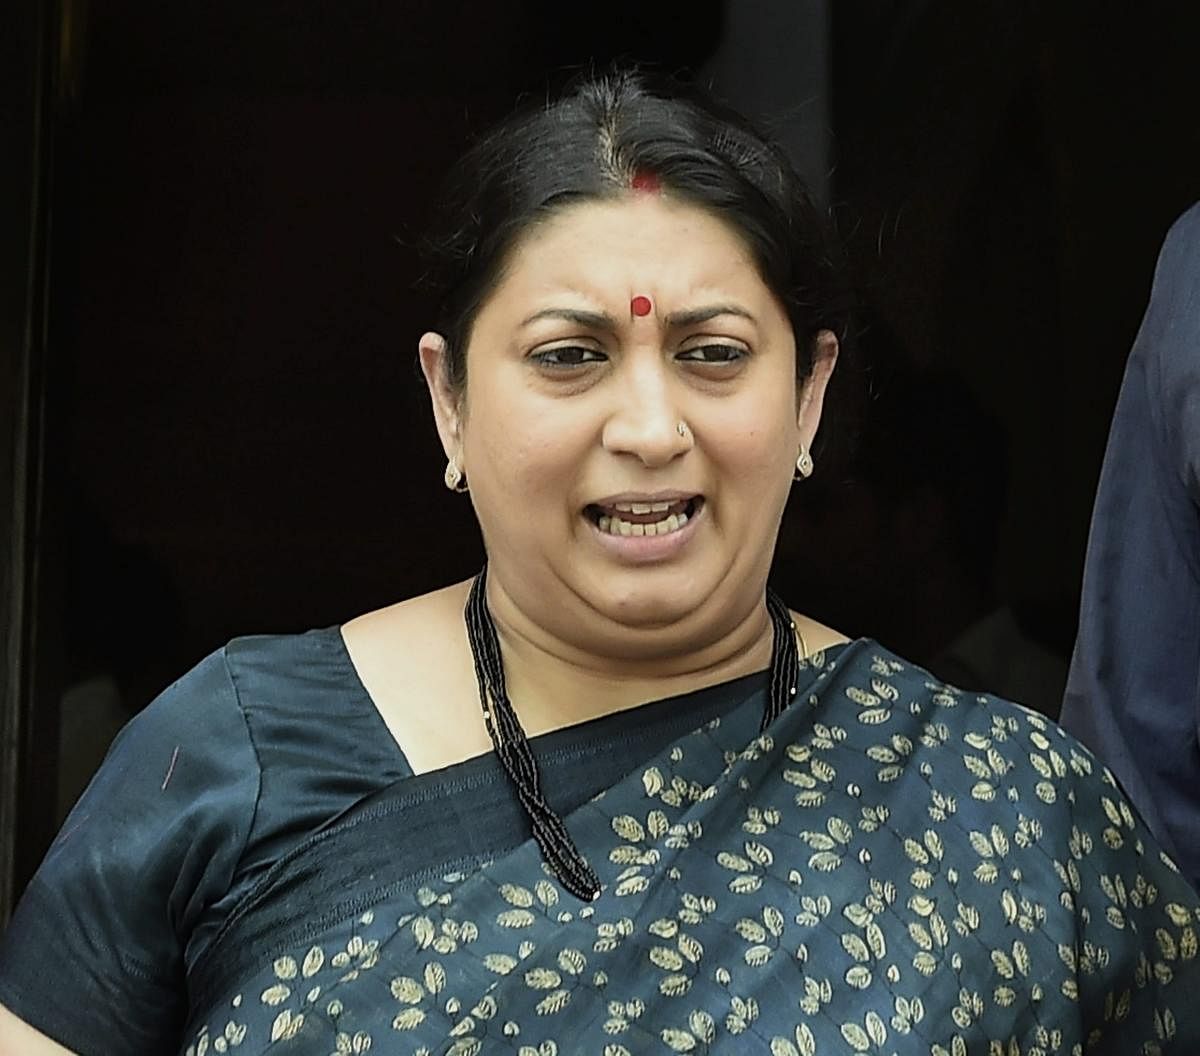 Stern action will be taken against those guilty in Unnao rape case, says Smriti Irani. PTI Photo